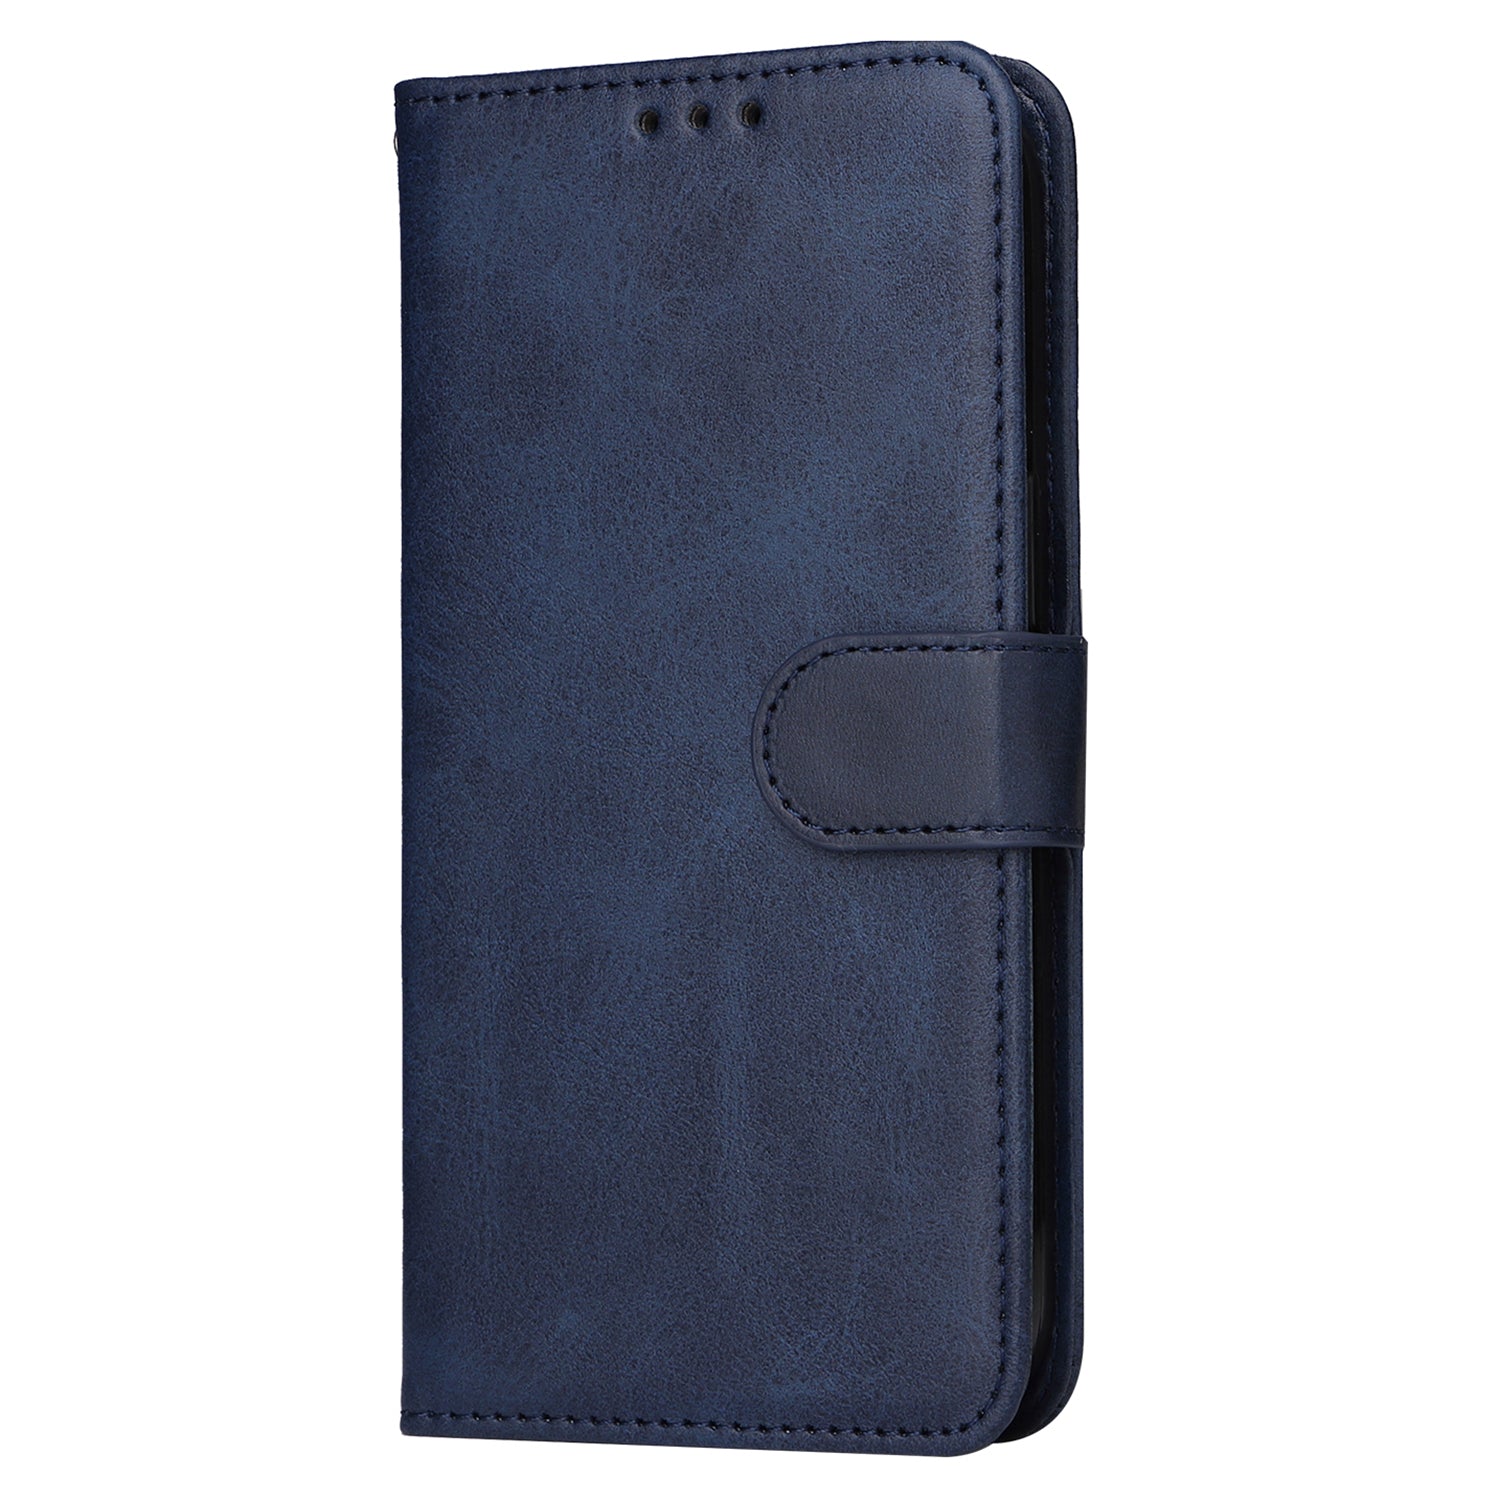 For Oppo A3 Pro 5G Case Leather Viewing Stand Mobile Phone Cover with Wrist Strap - Blue